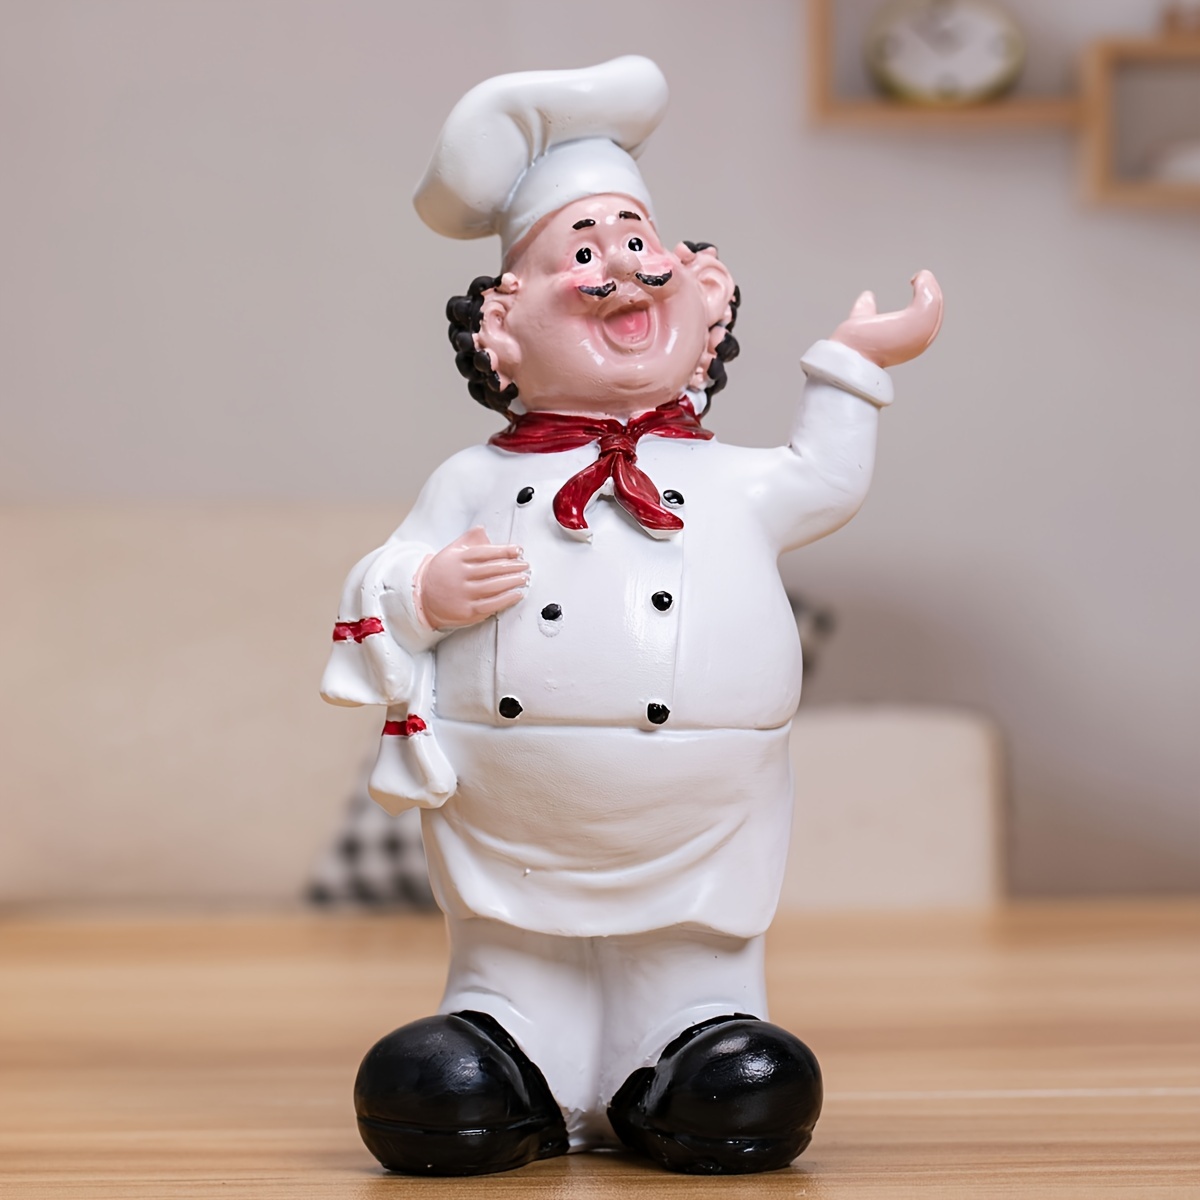 

1pc Chef Singing Ornament, Cartoon Statue Art Craft, For Kitchen Home Living Room Office Cafe Decor, Room Tabletop Display Entryway Decor, Winter Christmas New Year Decor